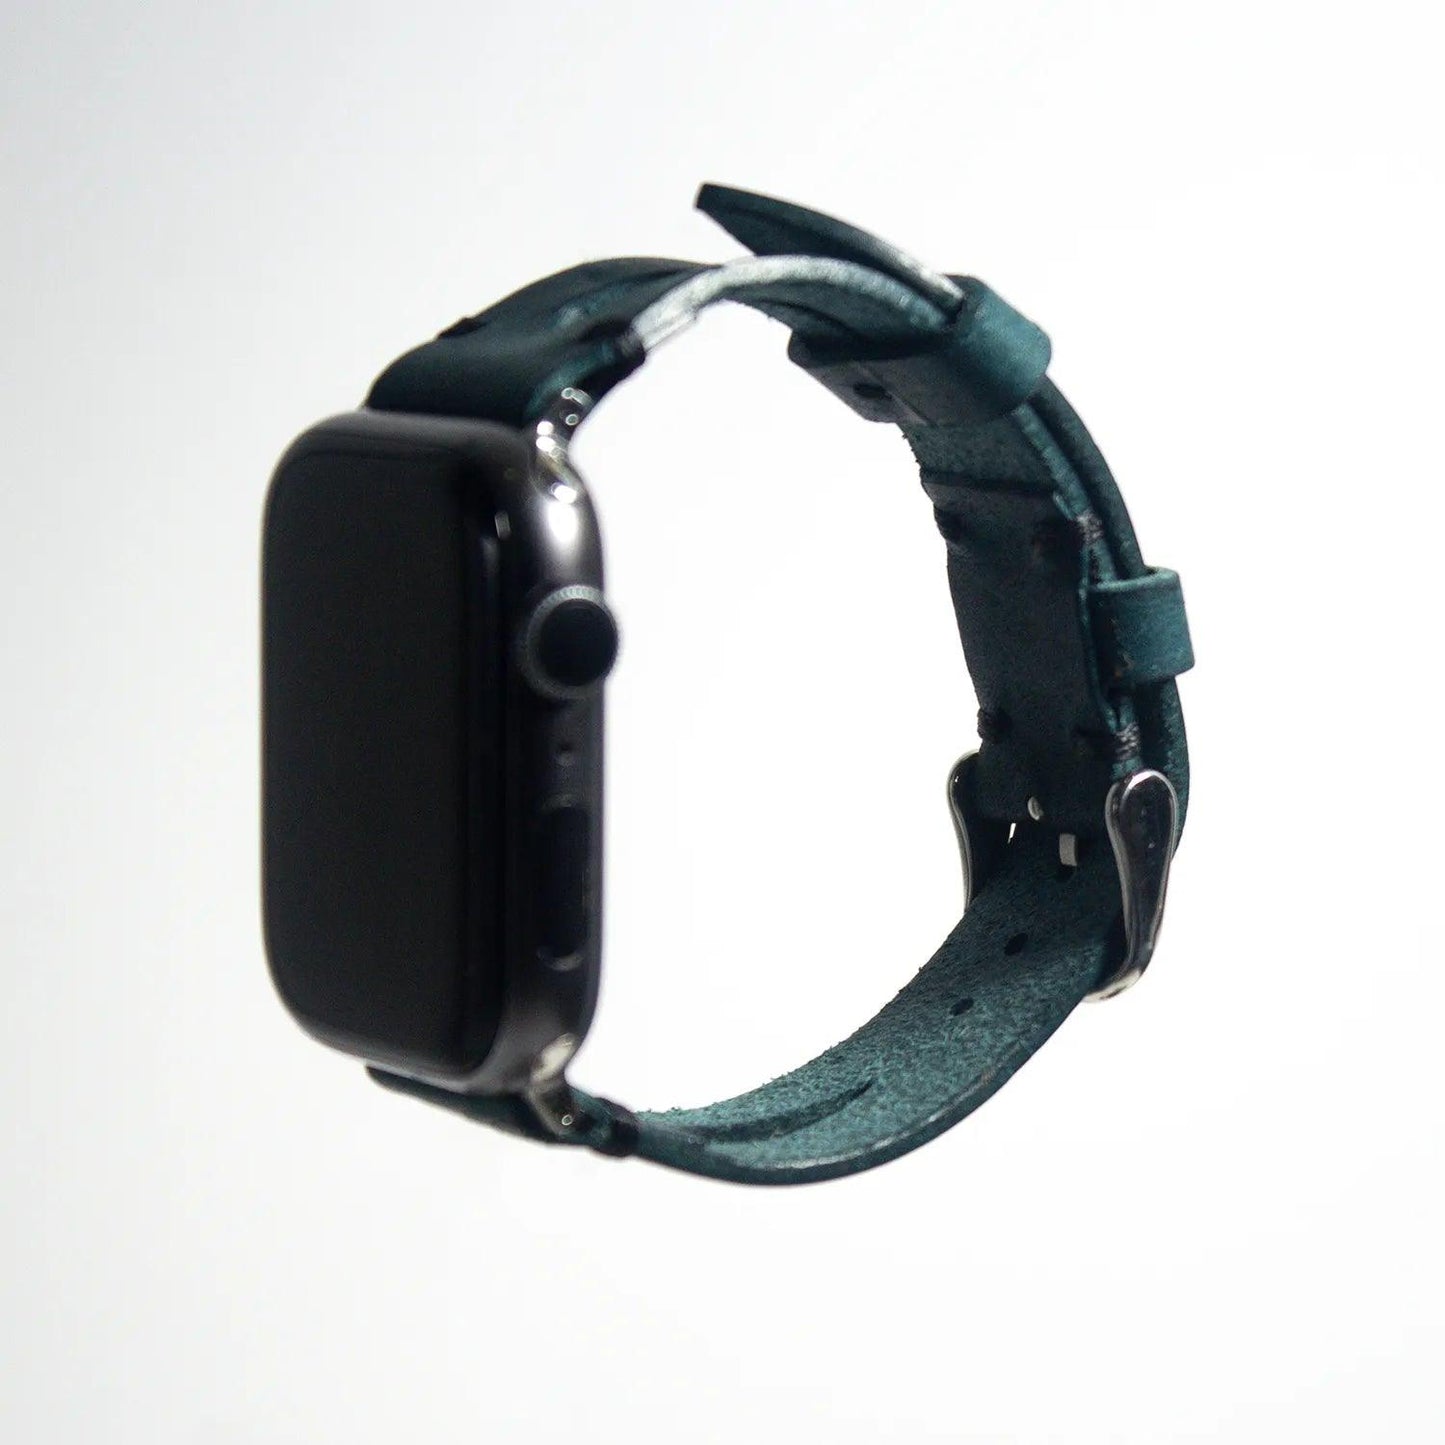 Refined apple watch leather band crafted from dark cyan Pueblo leather, a testament to Italian artistry.